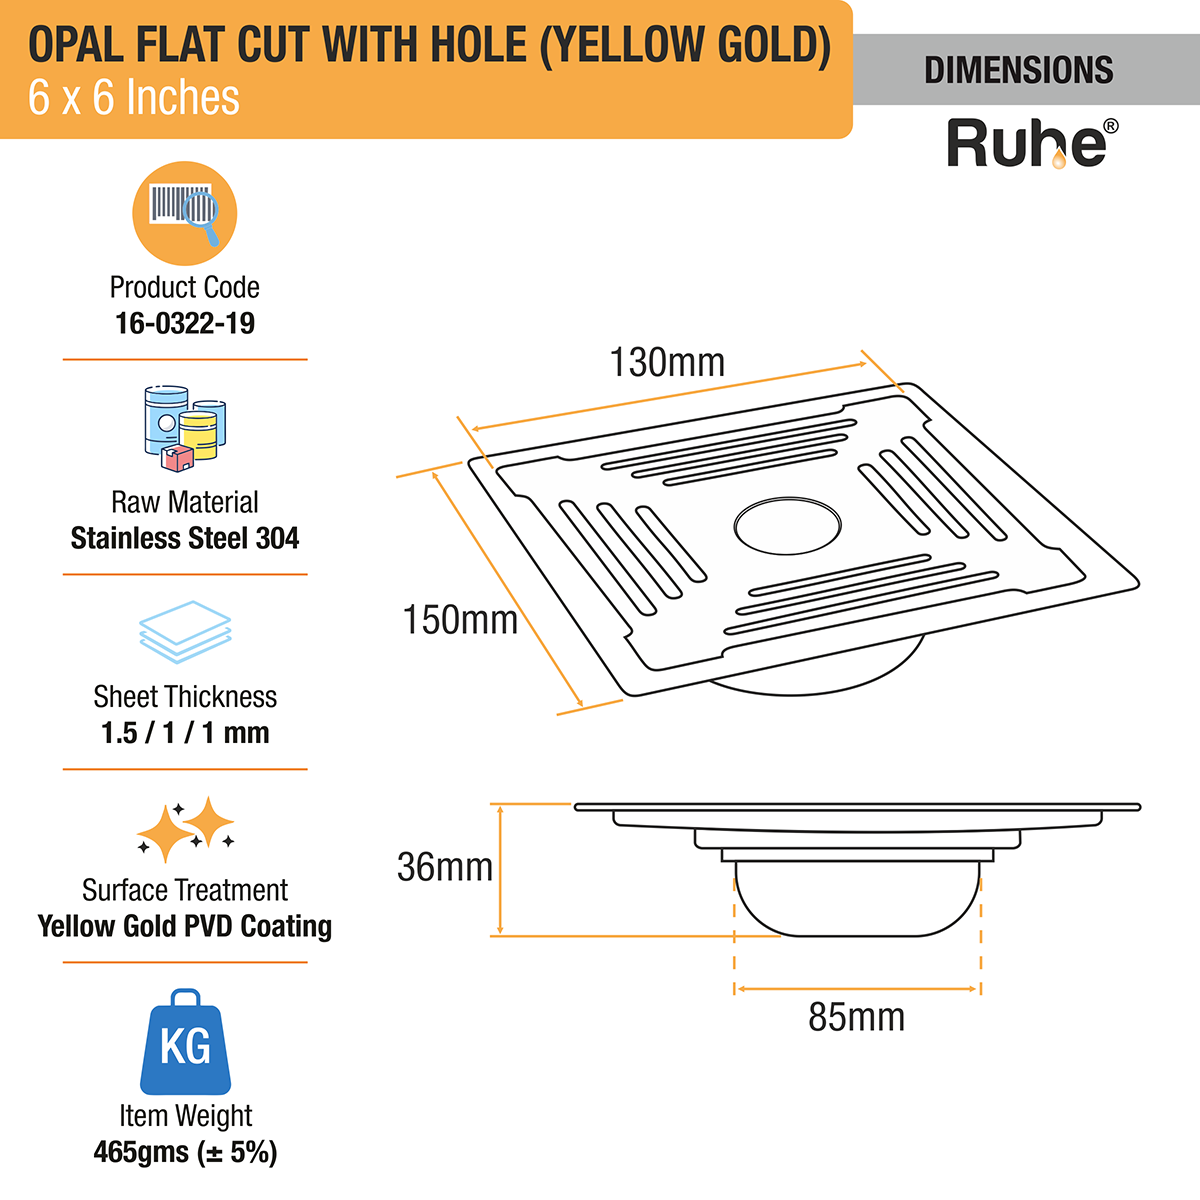 Opal Square Flat Cut Floor Drain in Yellow Gold PVD Coating (6 x 6 Inches) with Hole dimensions and sizes